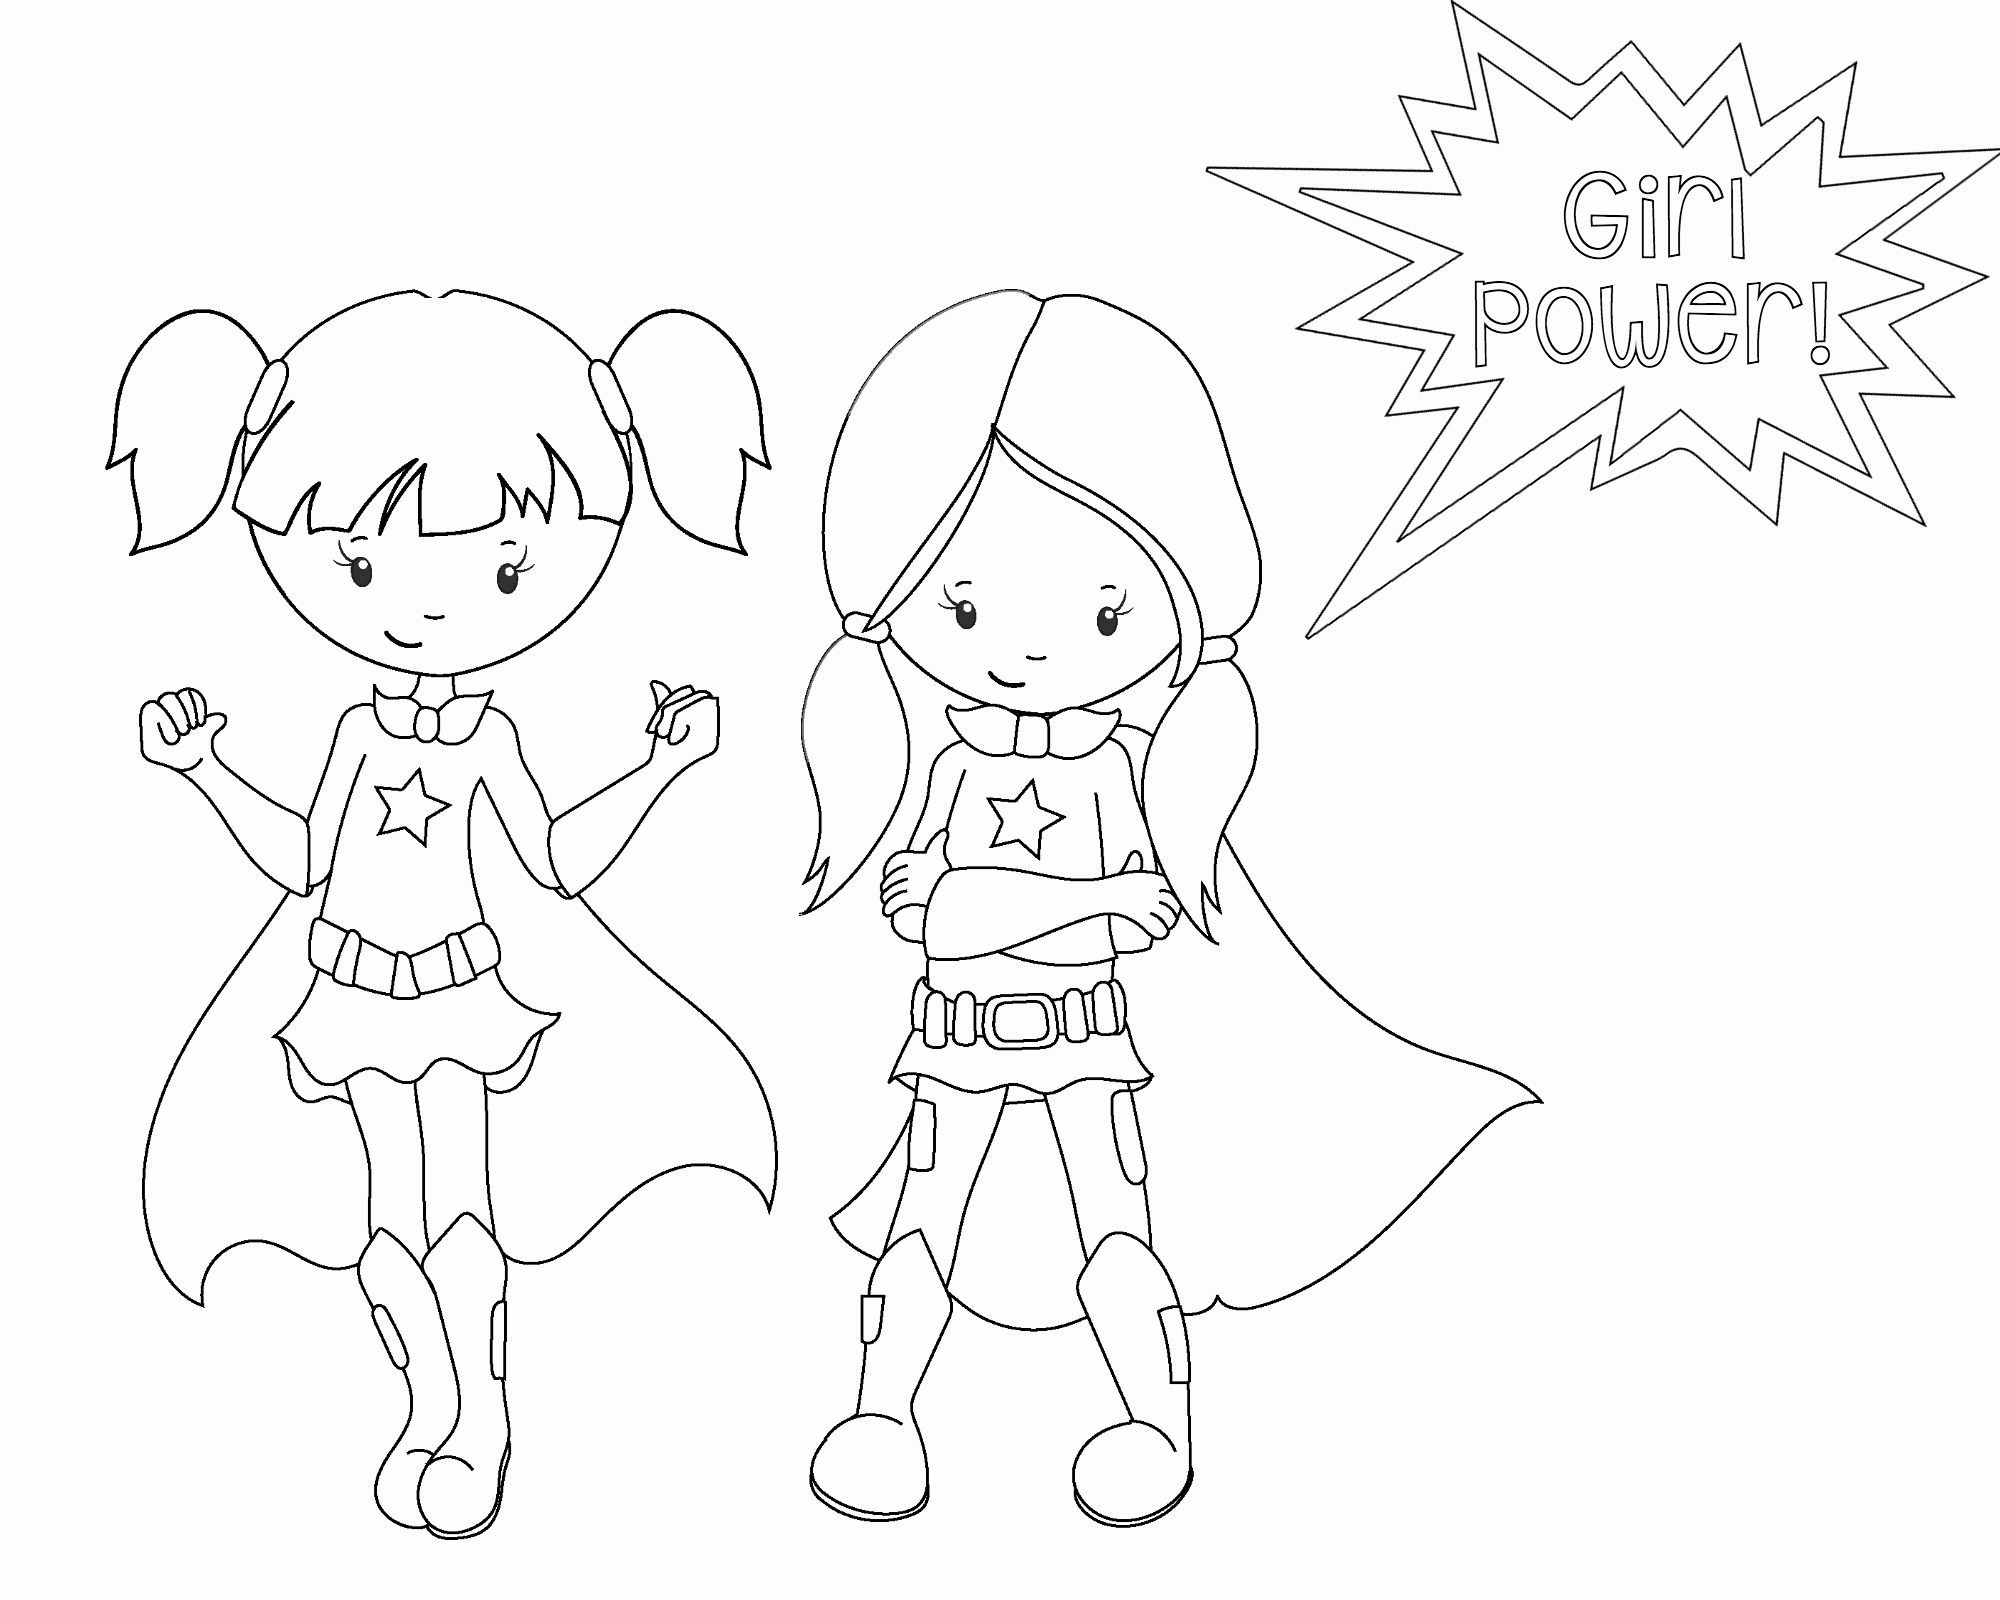 Barbie Halloween Coloring Pages at GetColorings.com  Free printable